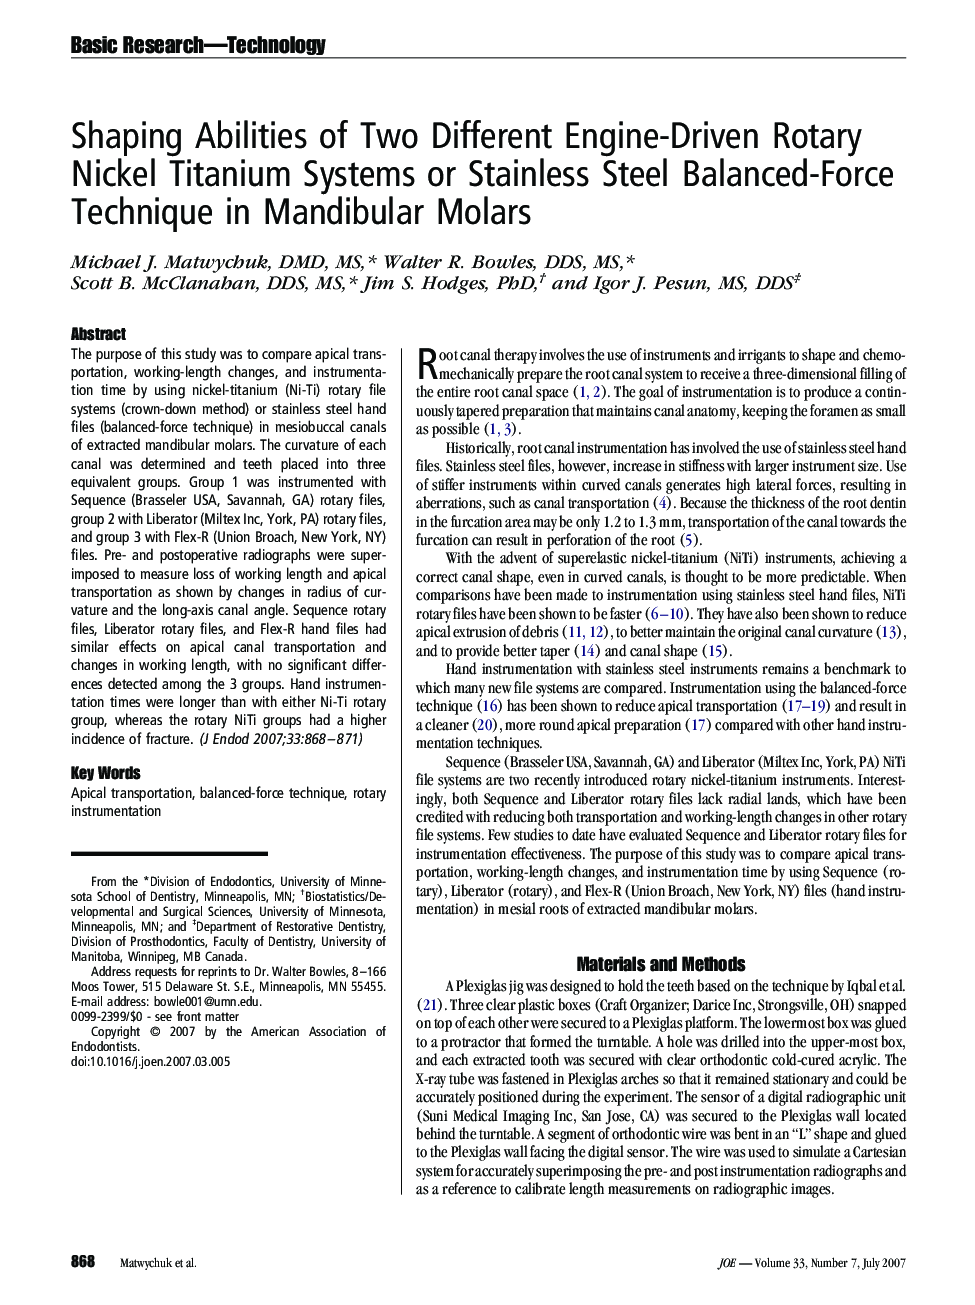 Shaping Abilities of Two Different Engine-Driven Rotary Nickel Titanium Systems or Stainless Steel Balanced-Force Technique in Mandibular Molars